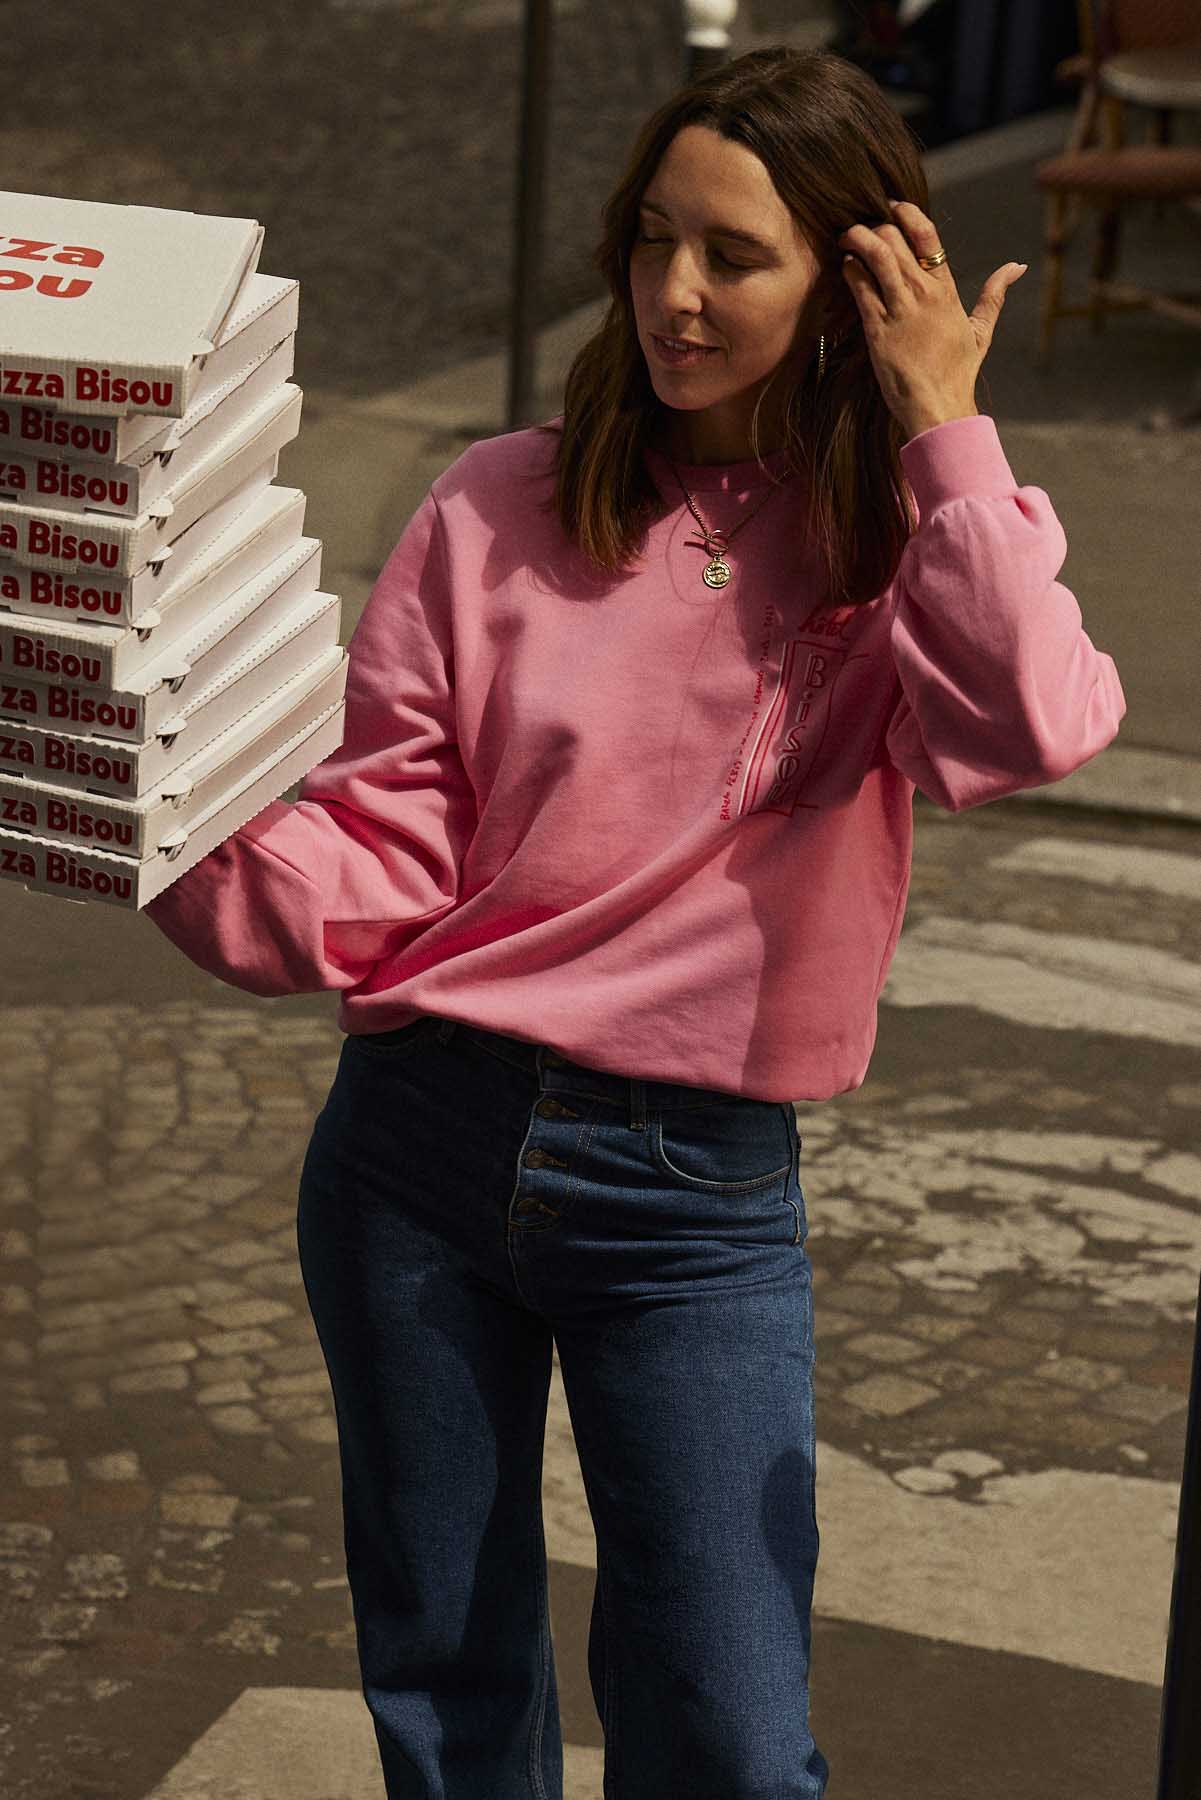 Sweatshirt Anvers Hotel kisses pink and red